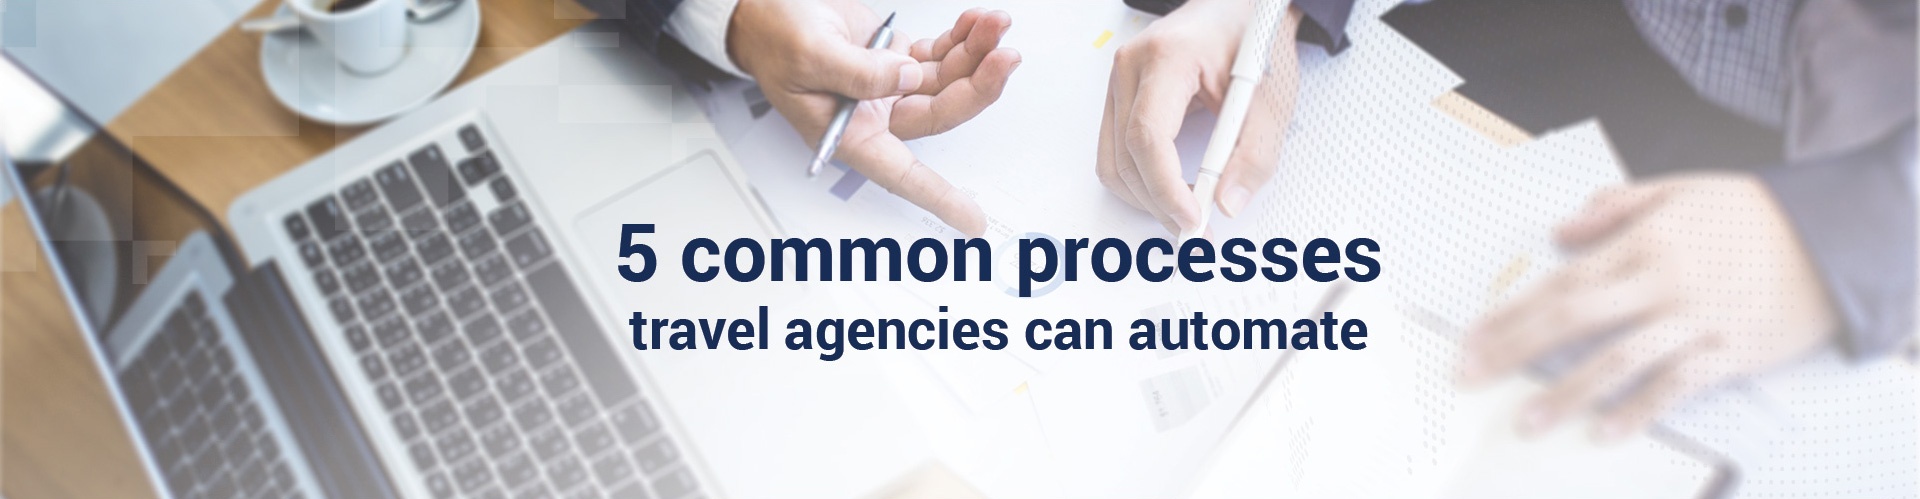 5 common processes travel agencies can automate